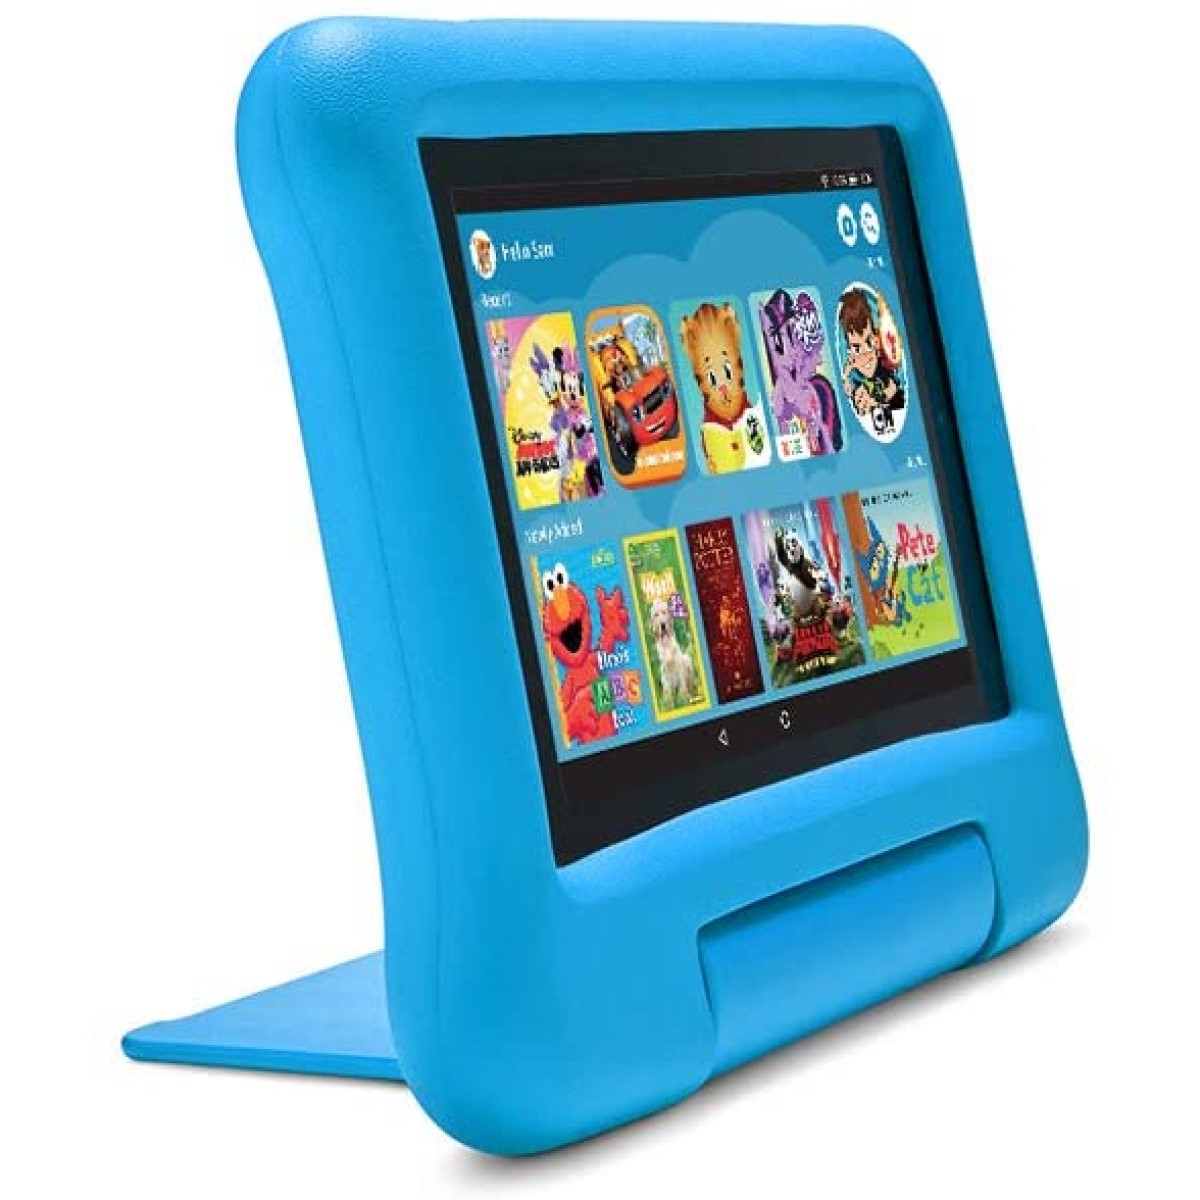 Amazon Kid-Proof Case for Amazon Fire 7 Tablet - Blue - tabal.ng : tabal.ng